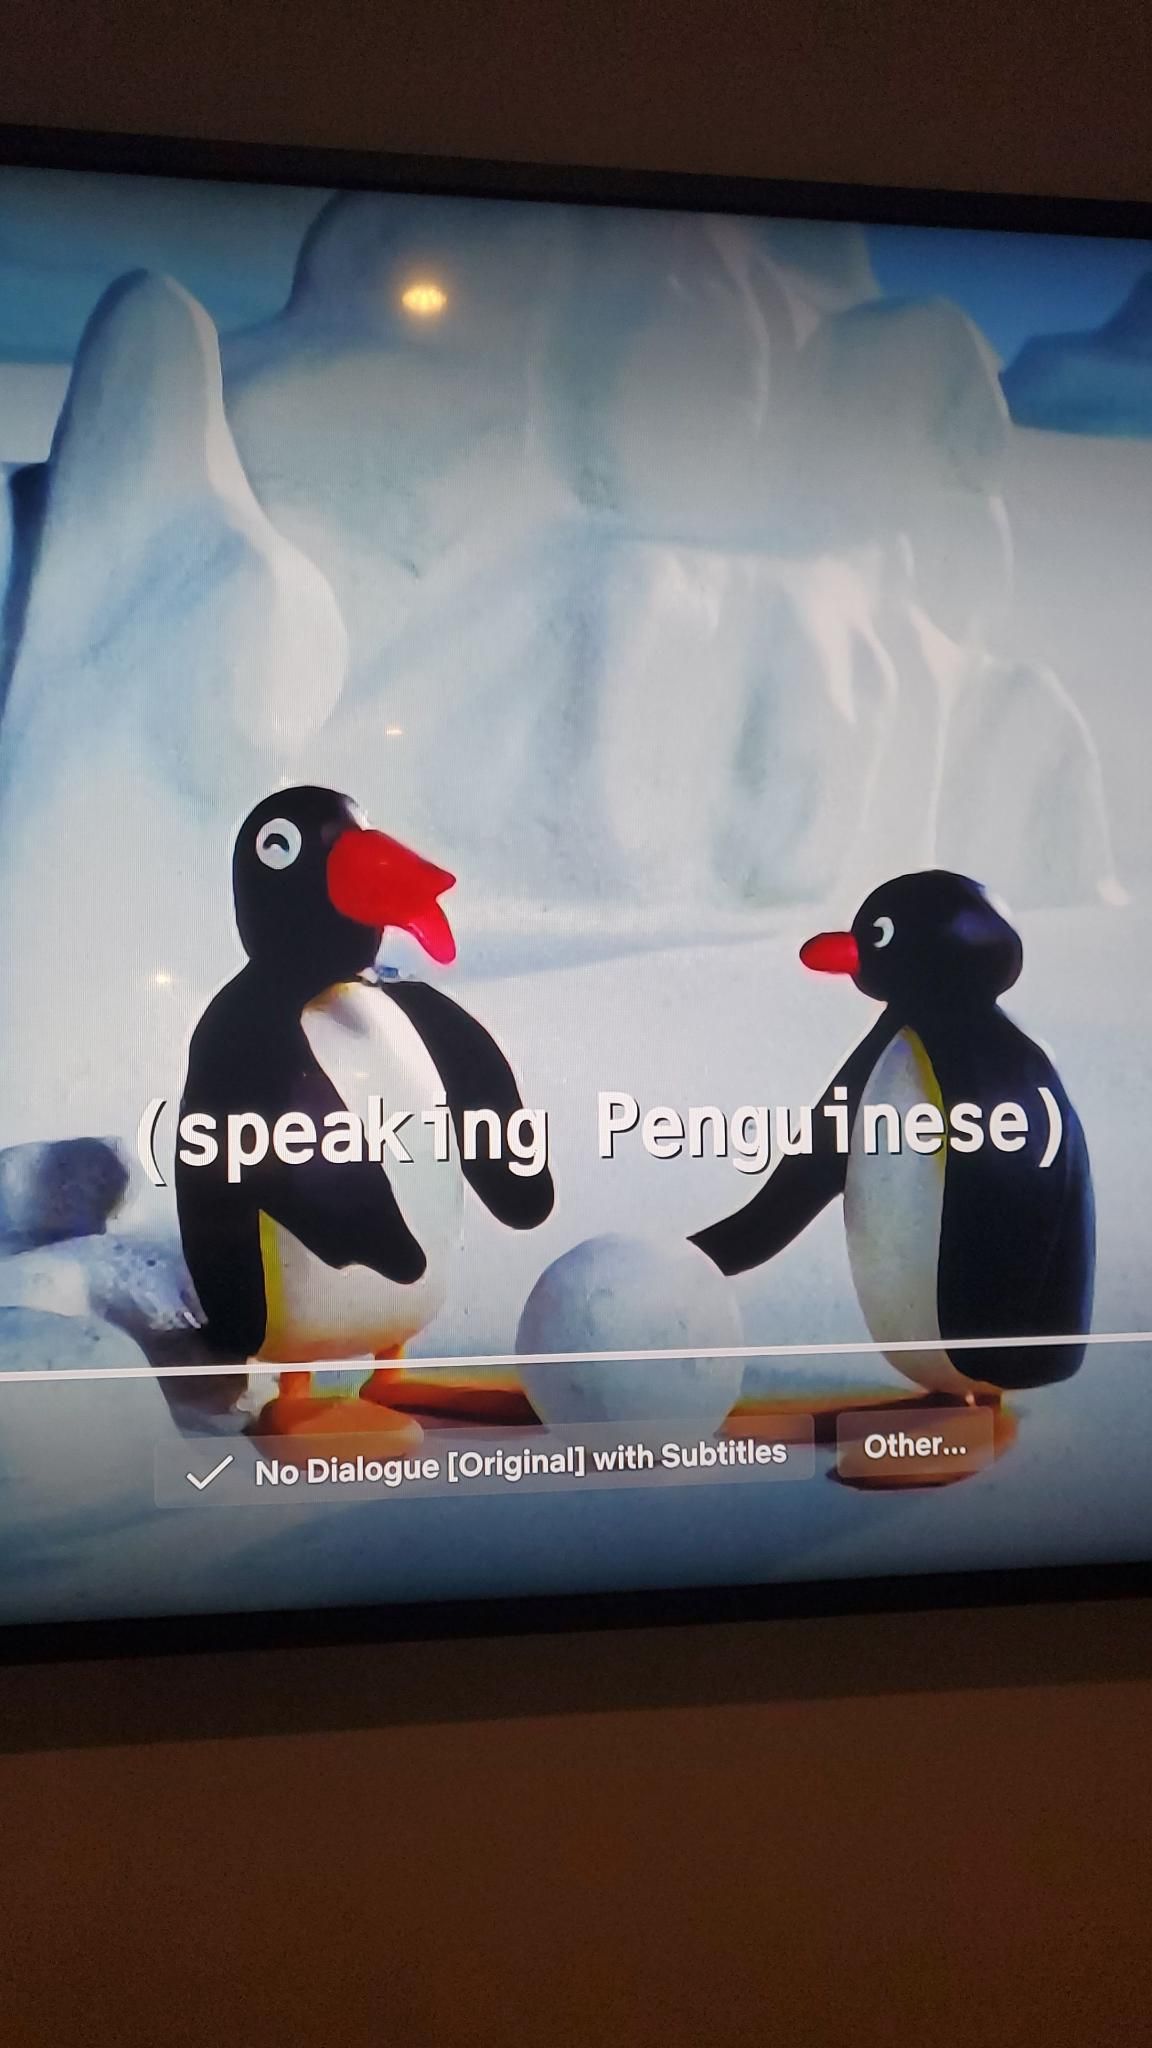 Accidentally turned on subtitles while watching Pingu